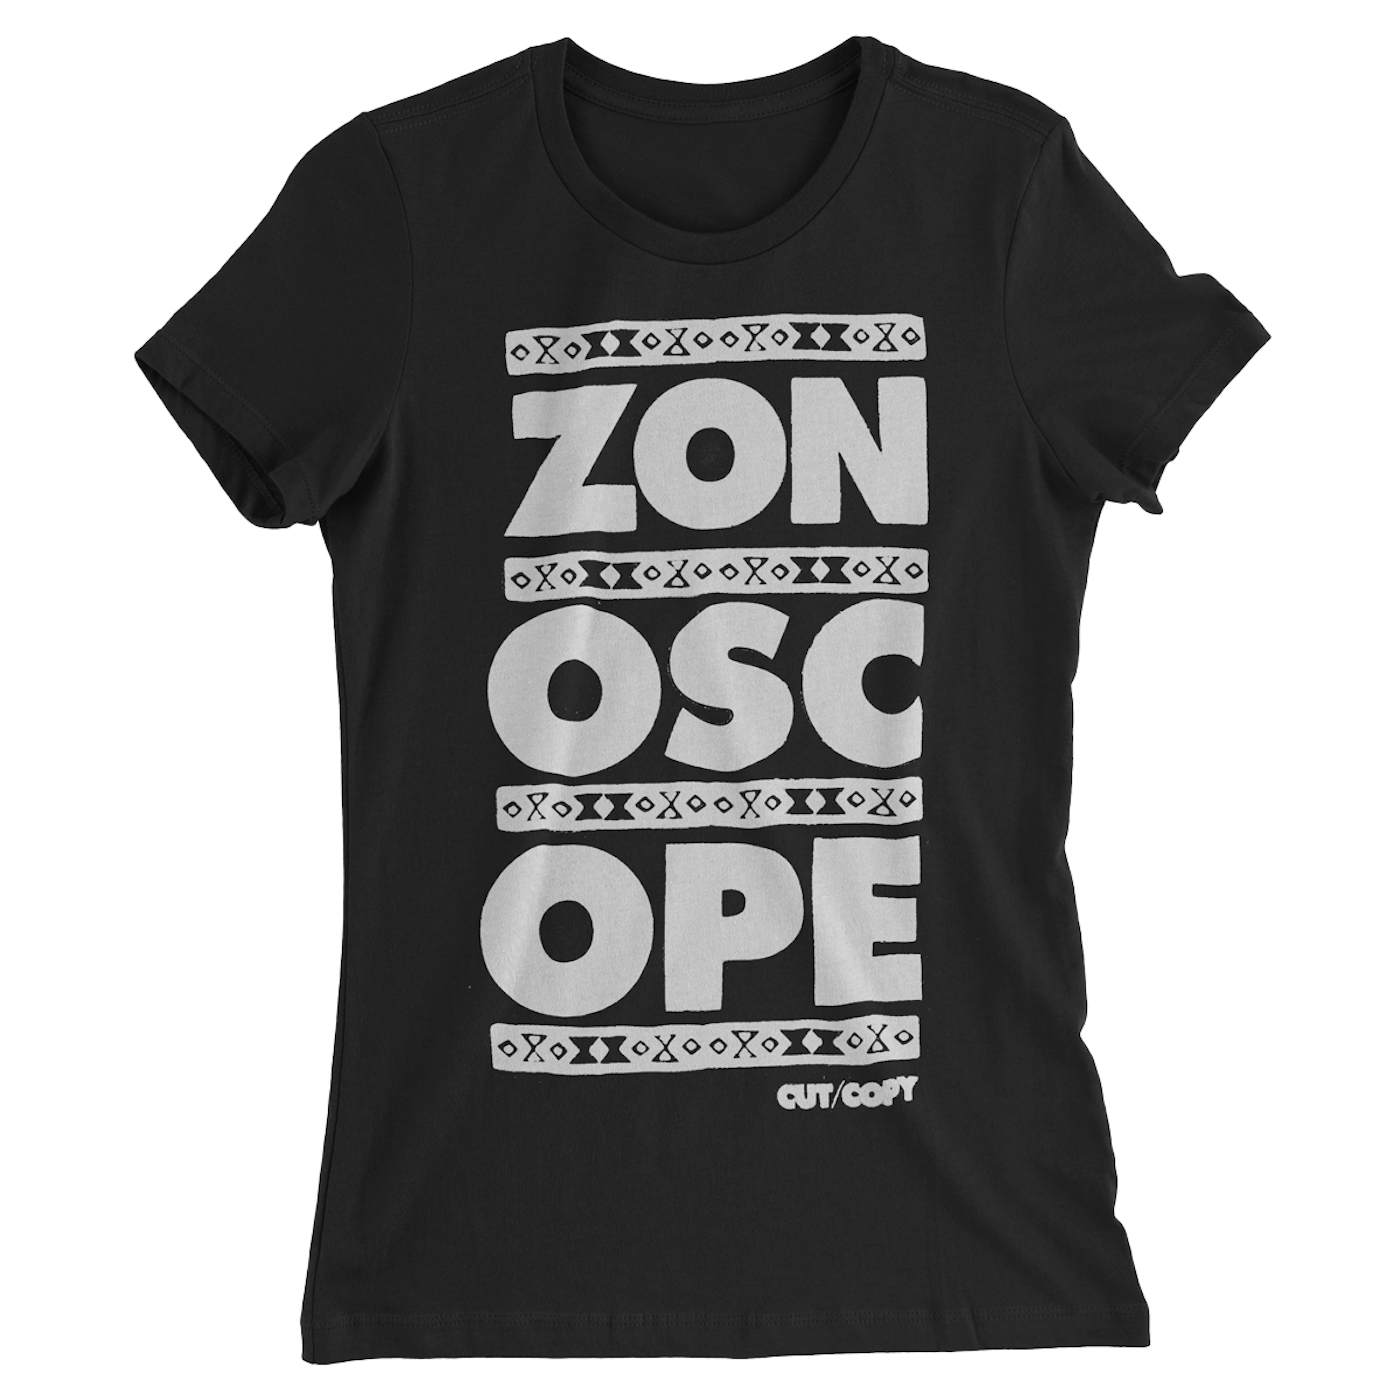 Cut Copy - ZON-OSC-OPE - 90s Baby Tee Fit - Black